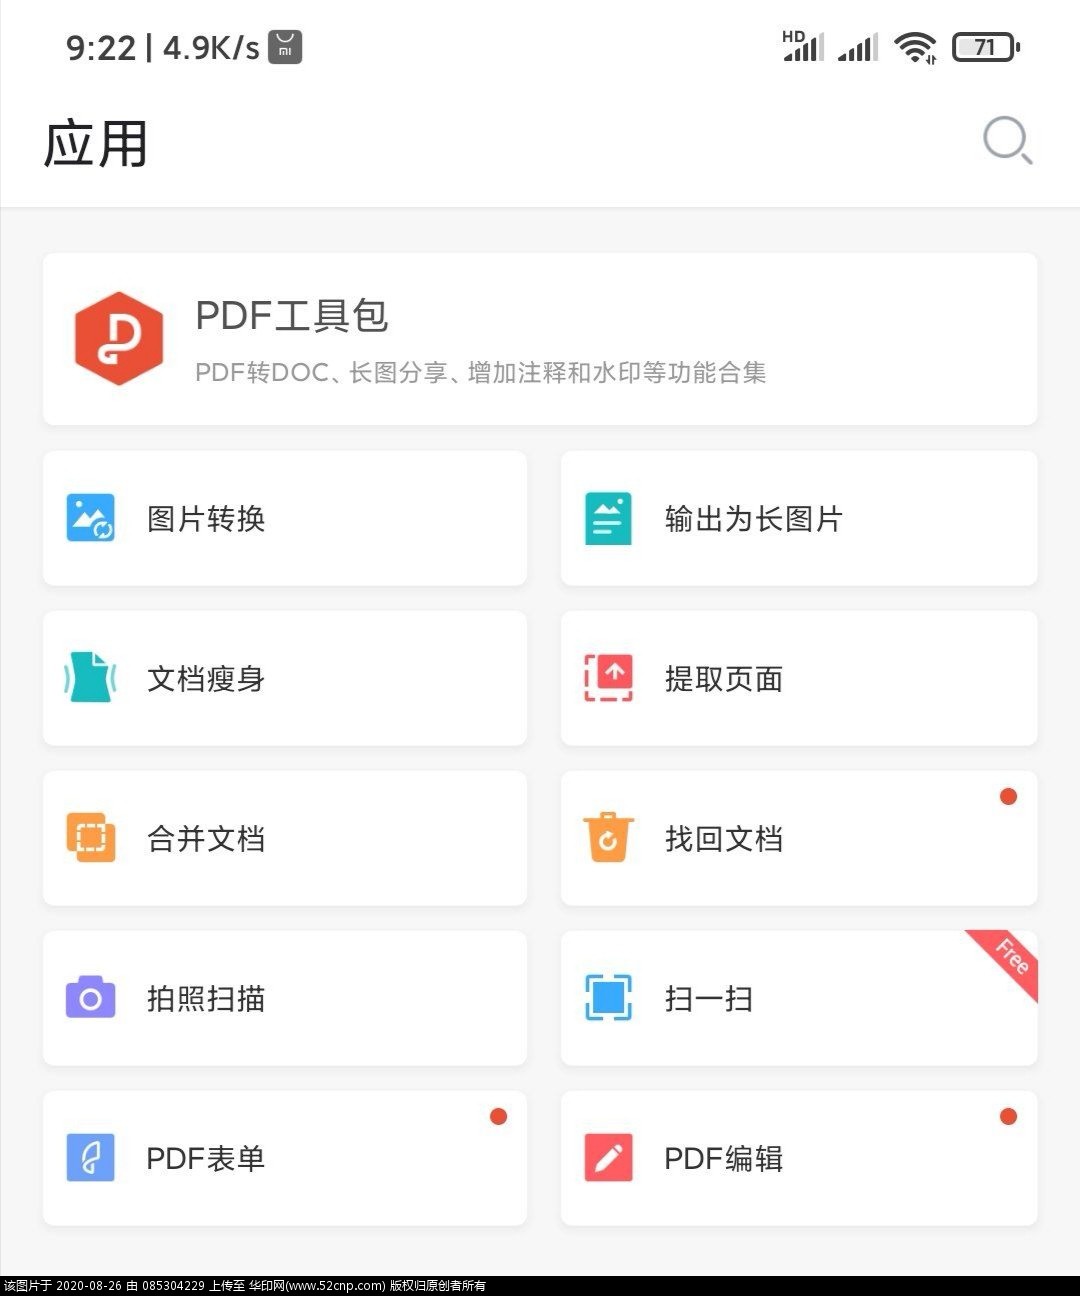 [Android] WPS Office 国际版 12.8.0 学习版无广告{tag}(1)